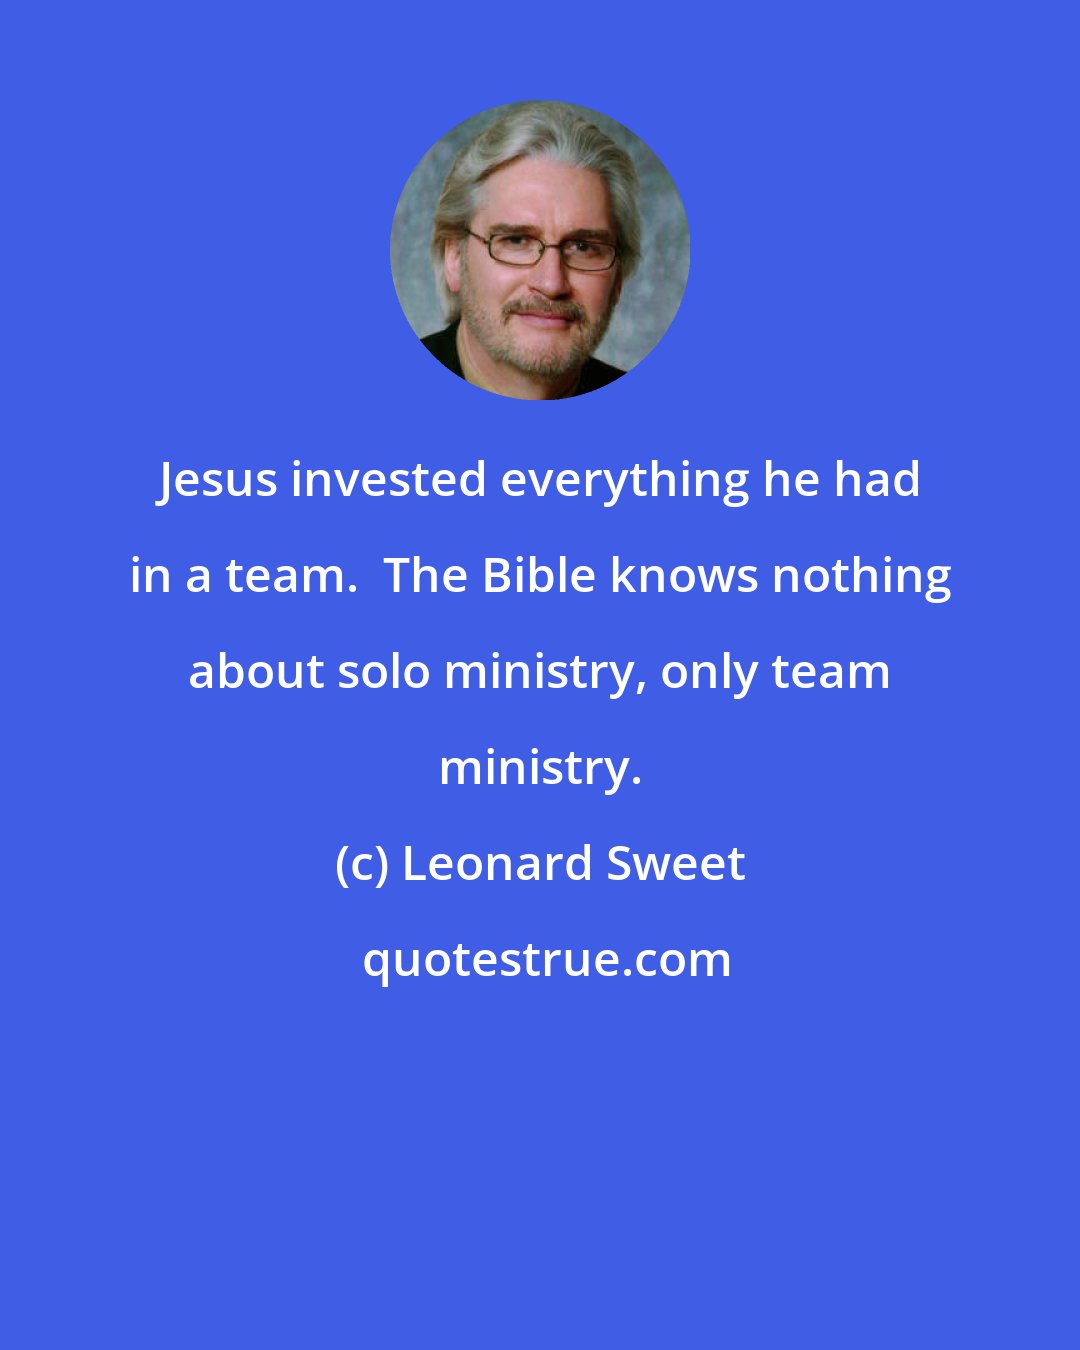 Leonard Sweet: Jesus invested everything he had in a team.  The Bible knows nothing about solo ministry, only team ministry.